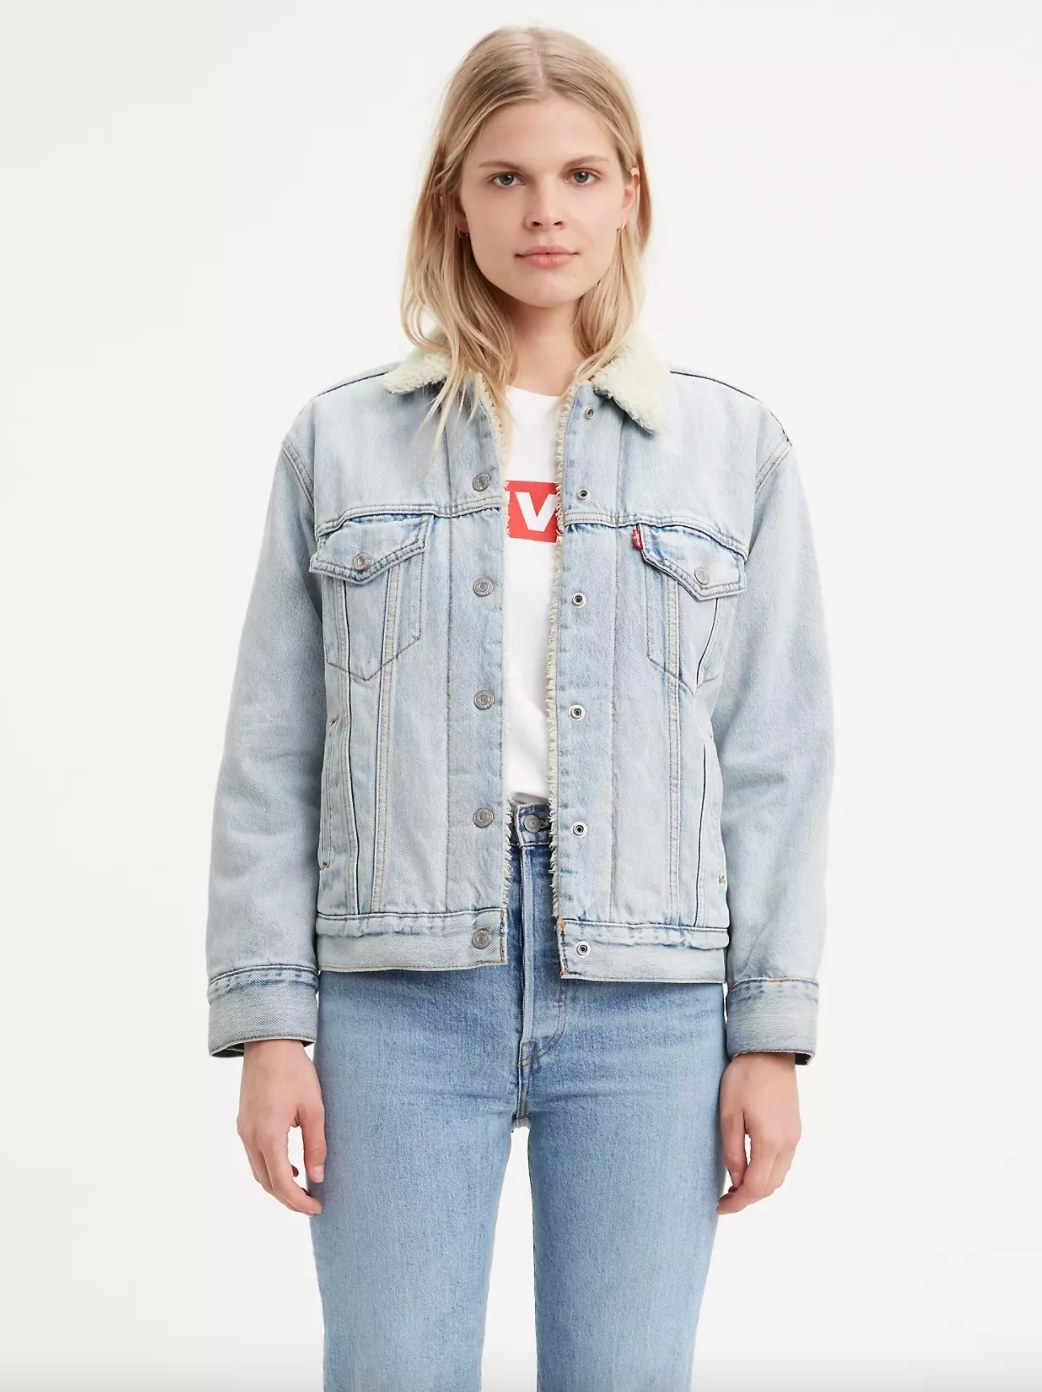 The sherpa trucker jacket a model in a white tee and jeans